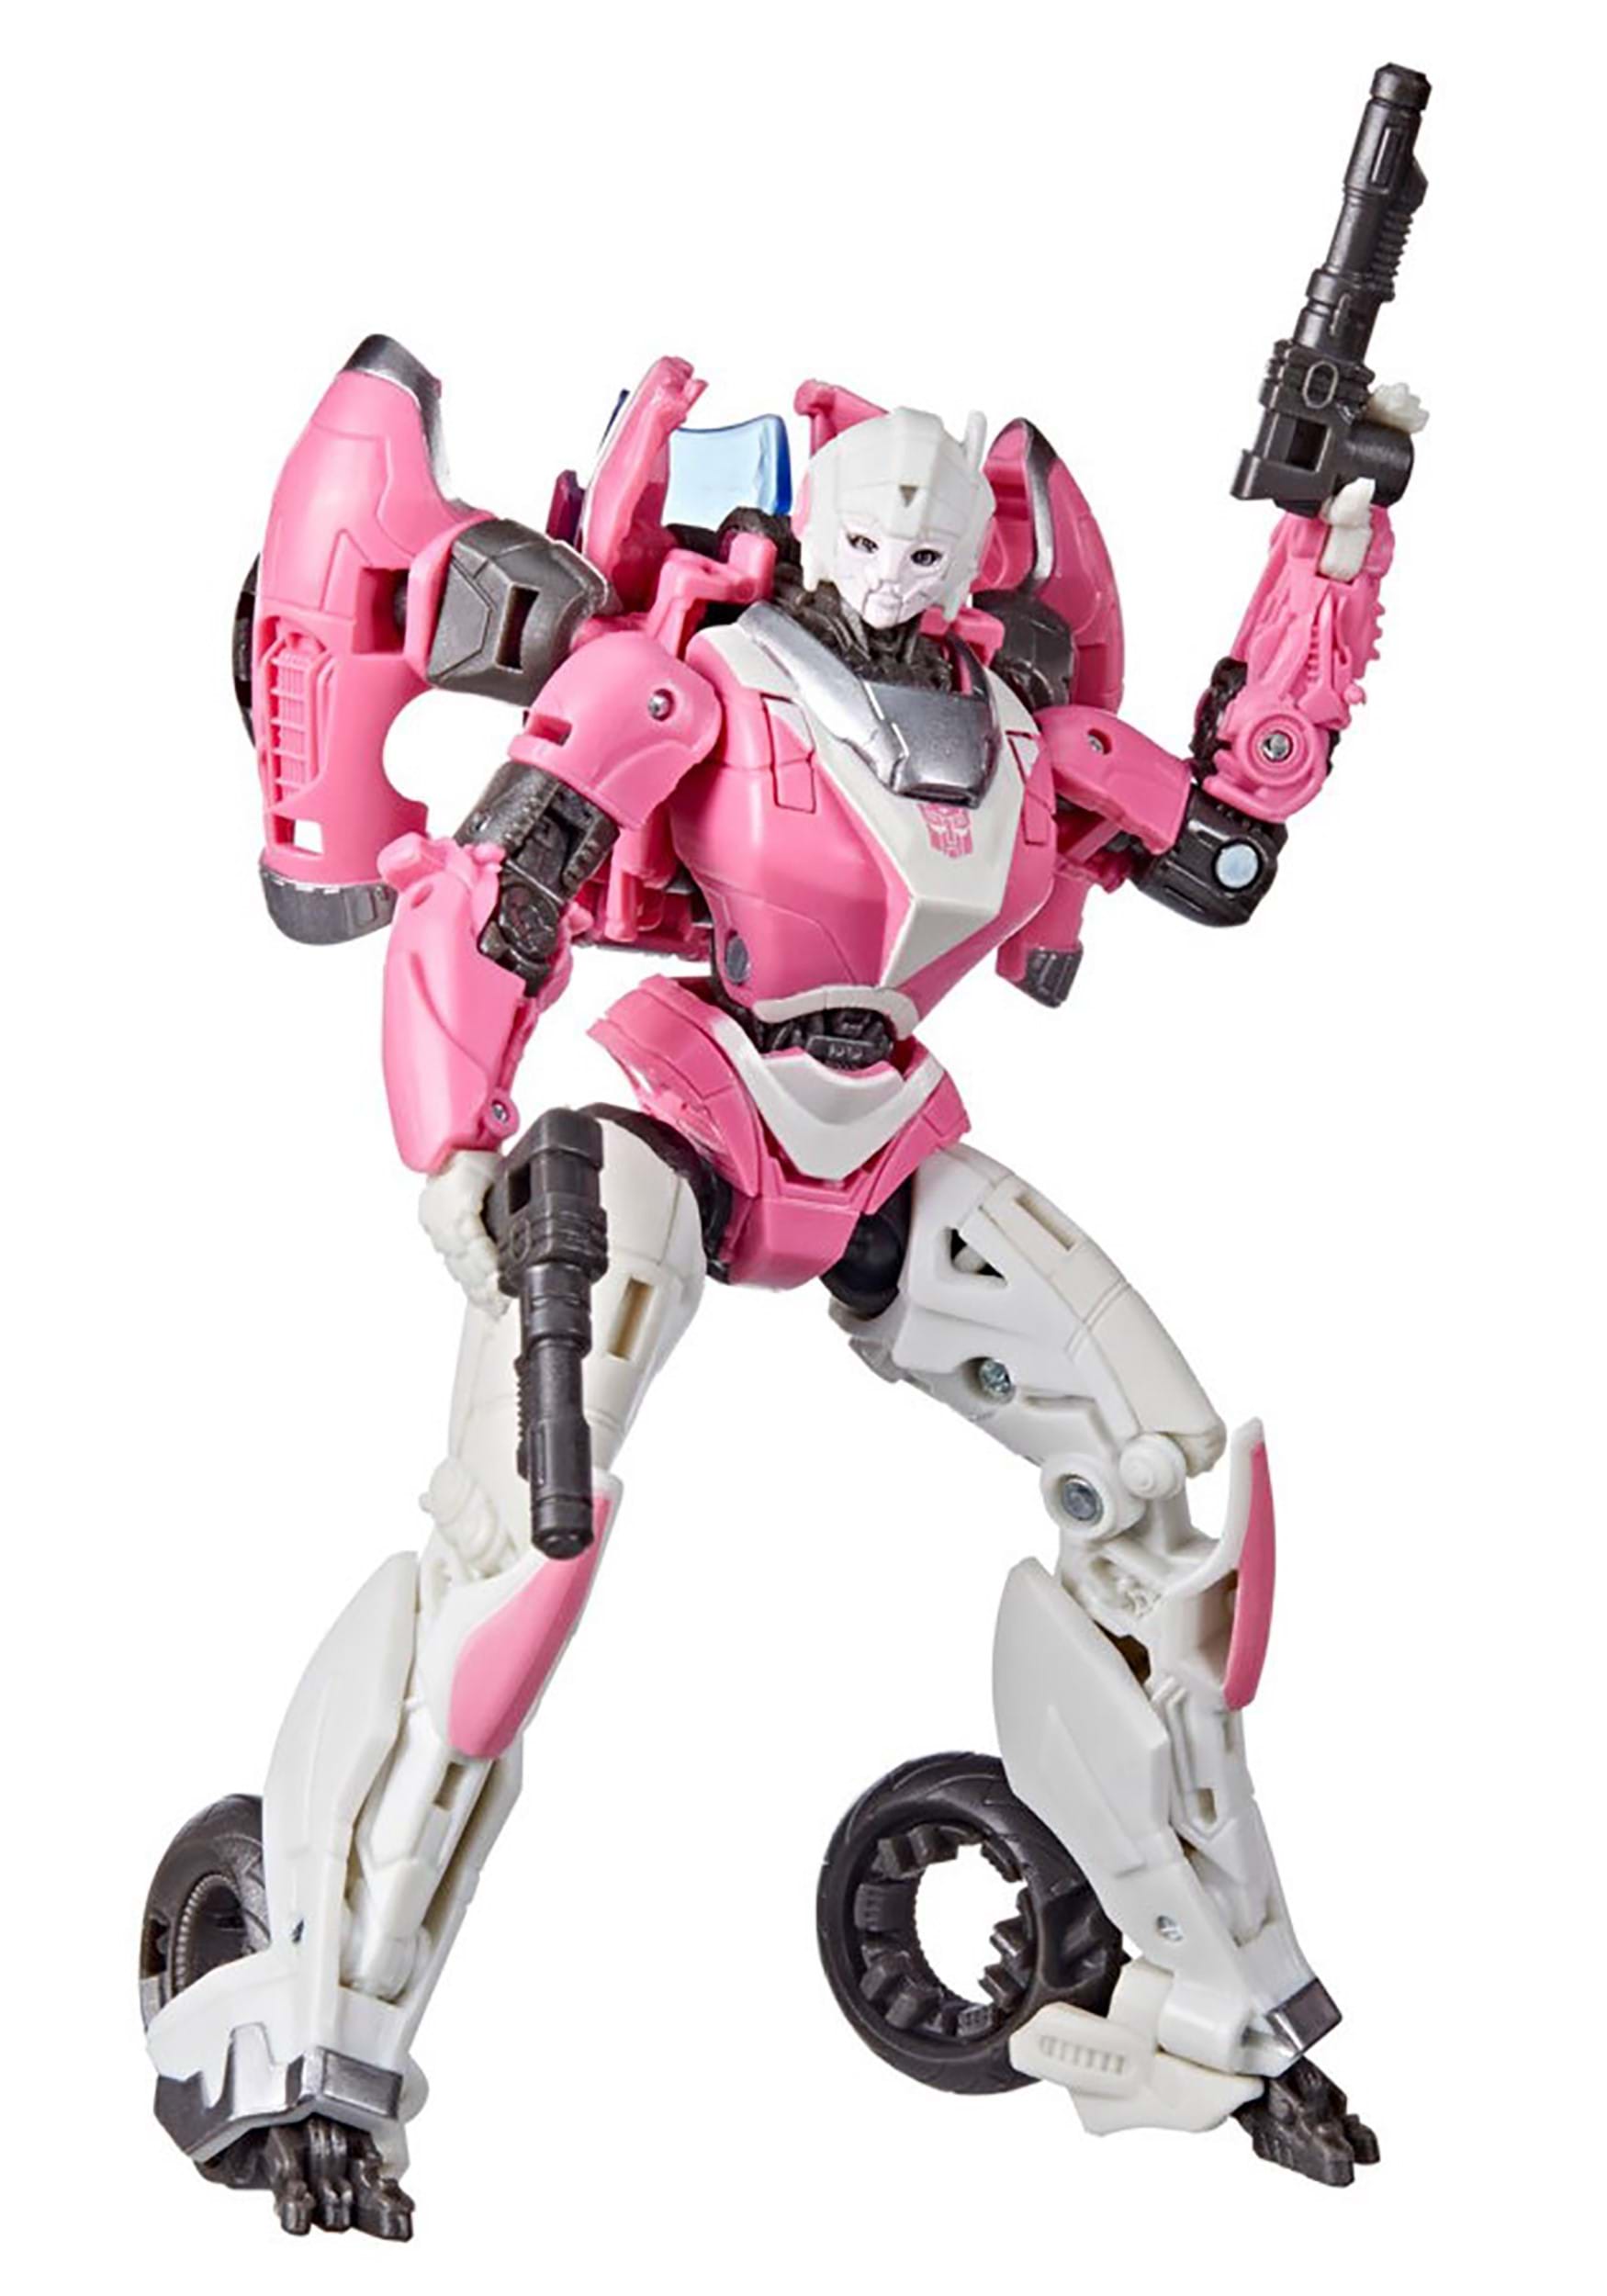 Arcee Deluxe Class | Transformers Prime Robots in Disguise